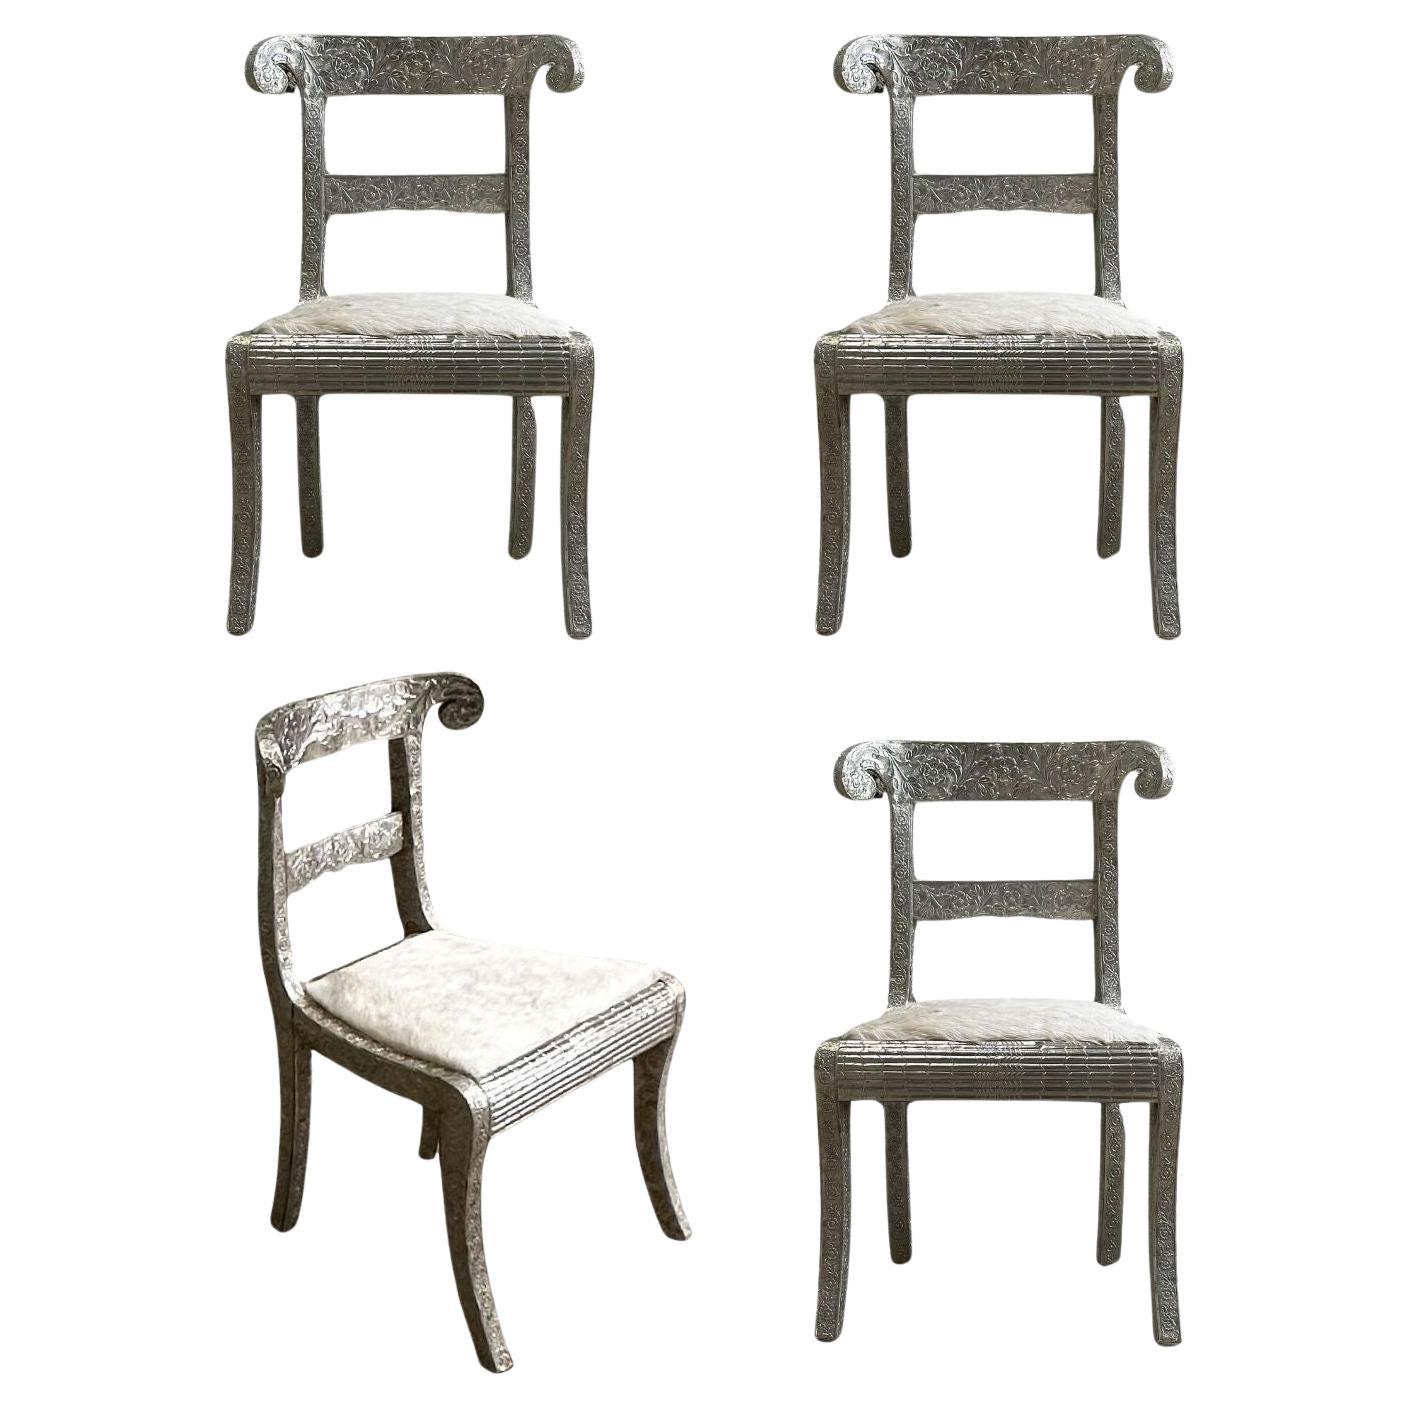 Anglo Raj Style-Indian Hammered Silver Wrap Dining Chairs w/Hair on Hide, 1950